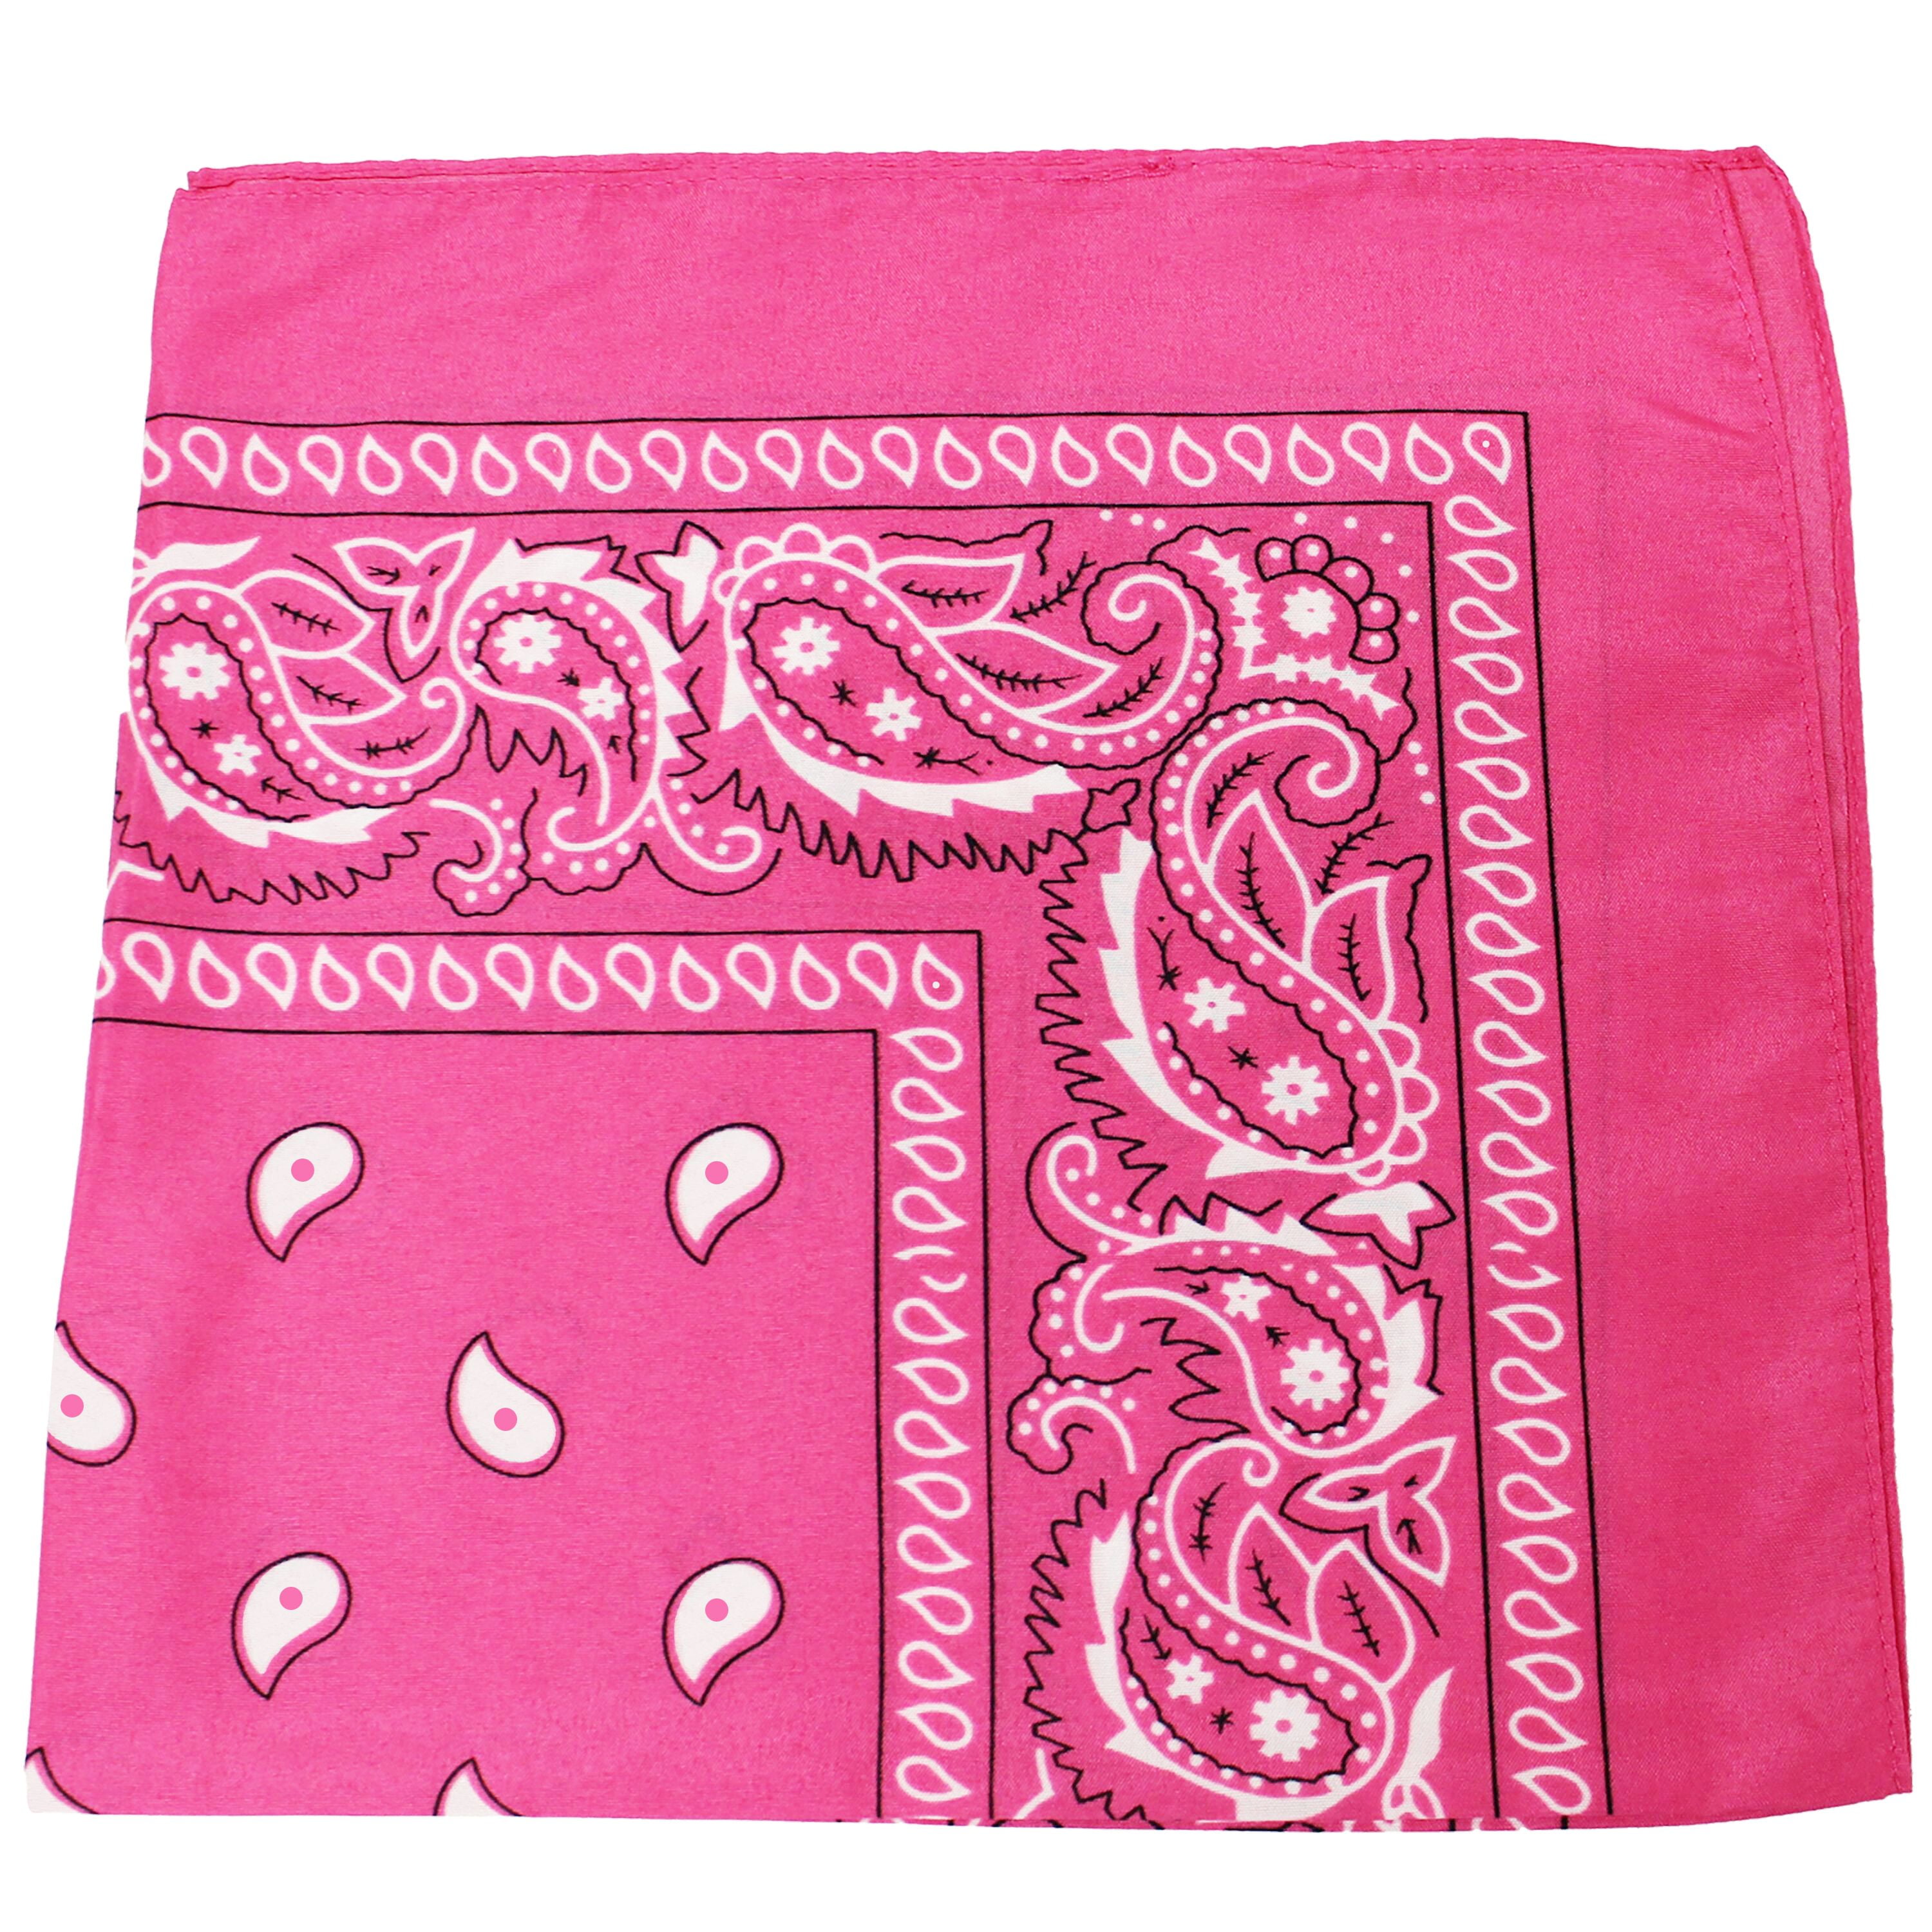 12 Color Pack Double Sided Print Paisley Bandana Scarf 